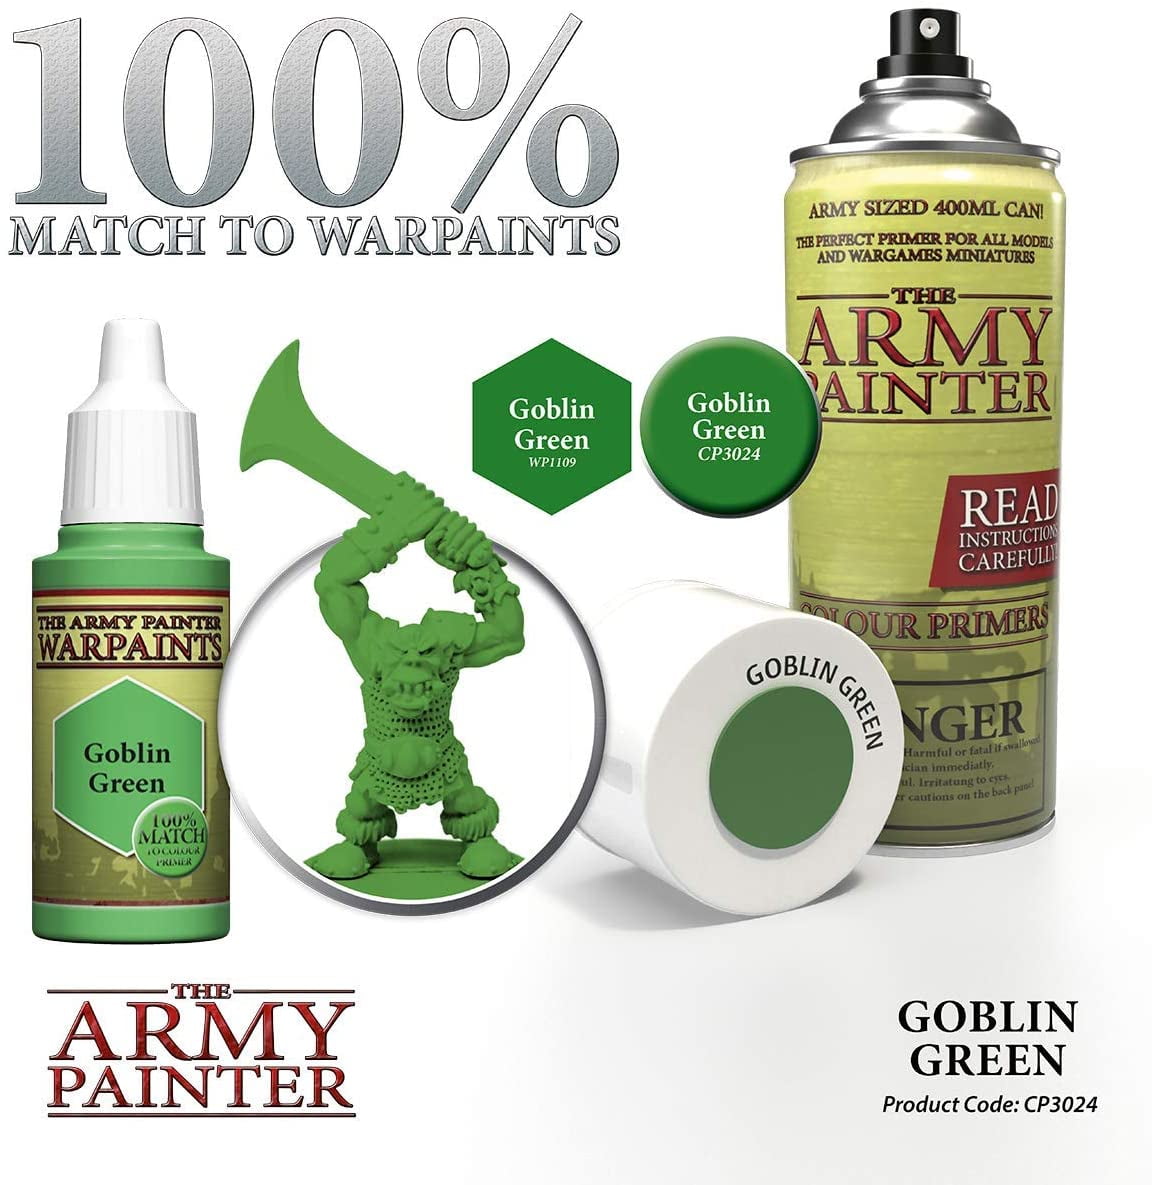 Orcpainternerd - REVIEW!!! TheArmyPainter kindly sent me there new 2 in 1 airbrush  medium and tested it this morning. I tested it with Army Painter paints, GW  and vallejo. First off the